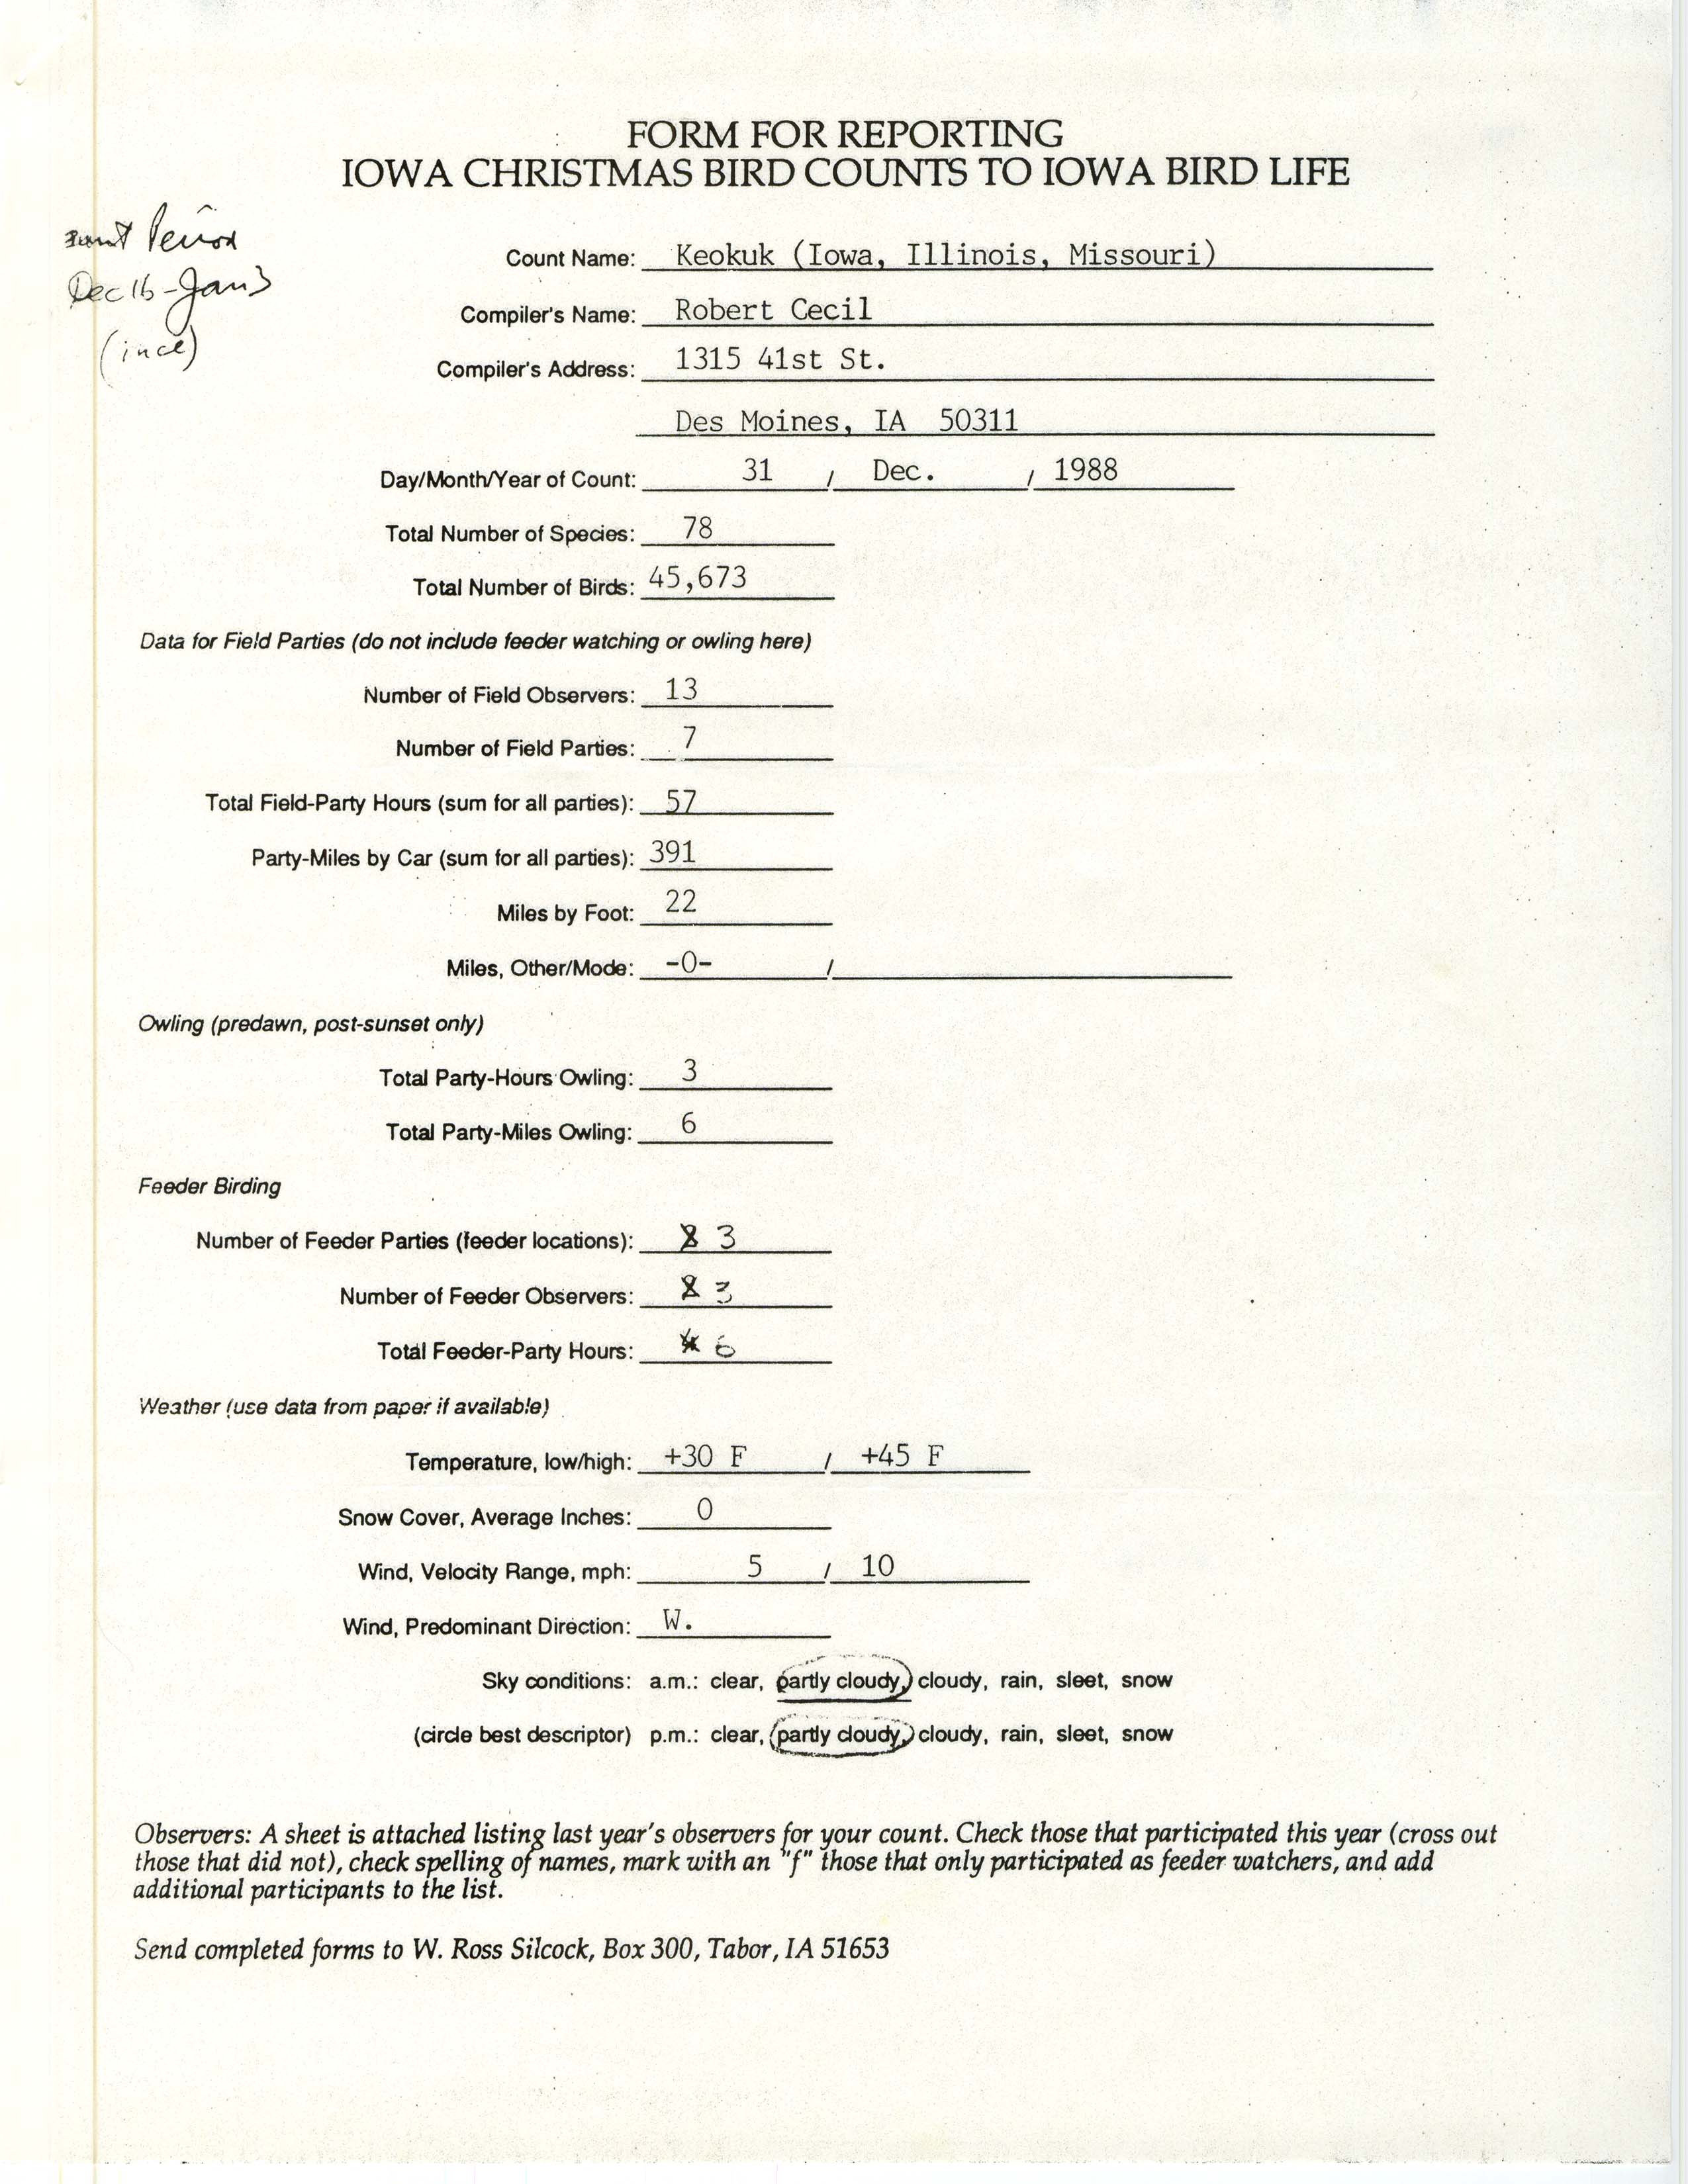 Form for reporting Iowa Christmas bird counts to Iowa Bird Life, Robert I. Cecil, December 31, 1988